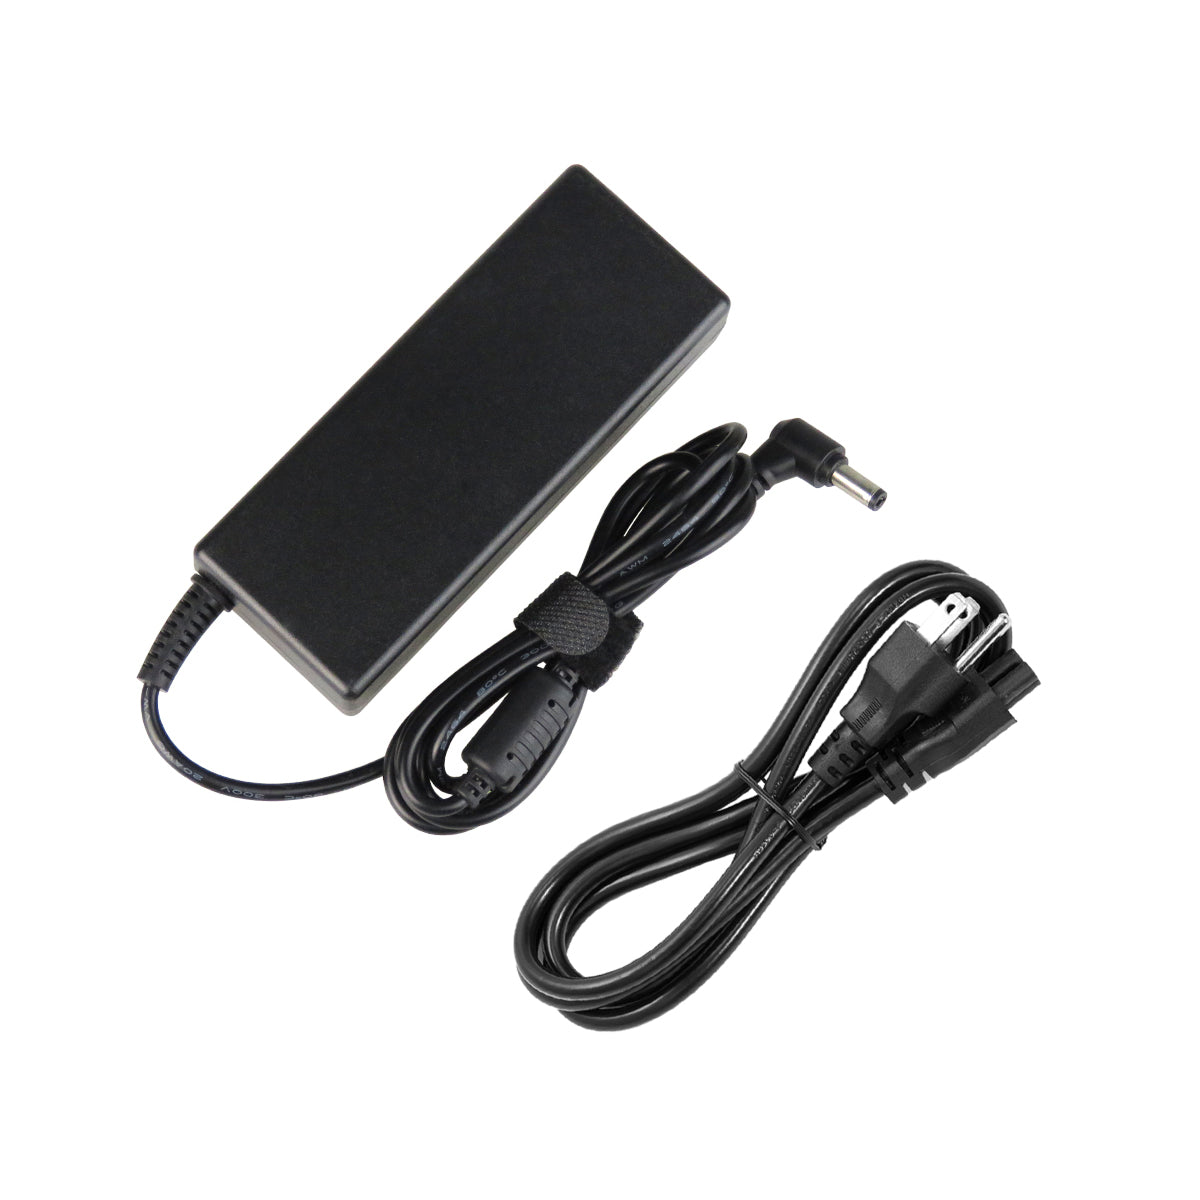 AC Adapter Charger for Gateway 8510 Notebook.